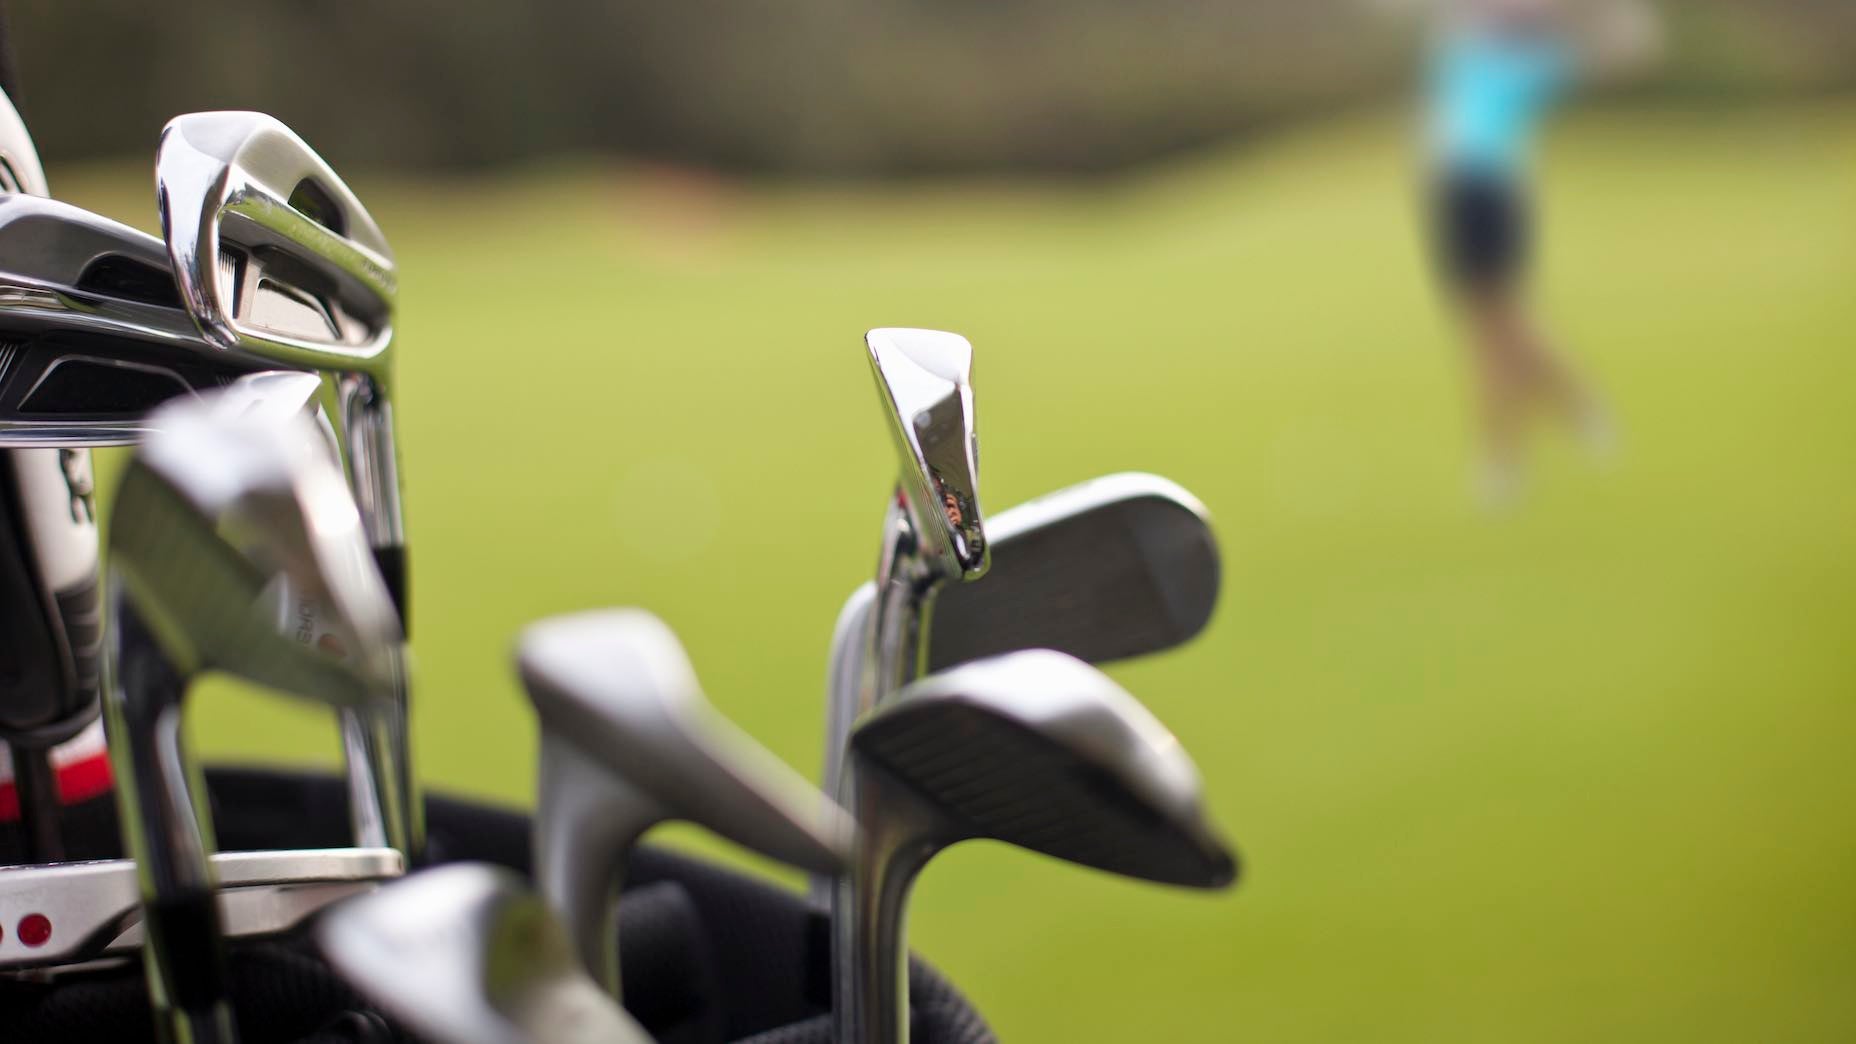 How do you to pick the right iron type? | Gear Questions - Golf.com